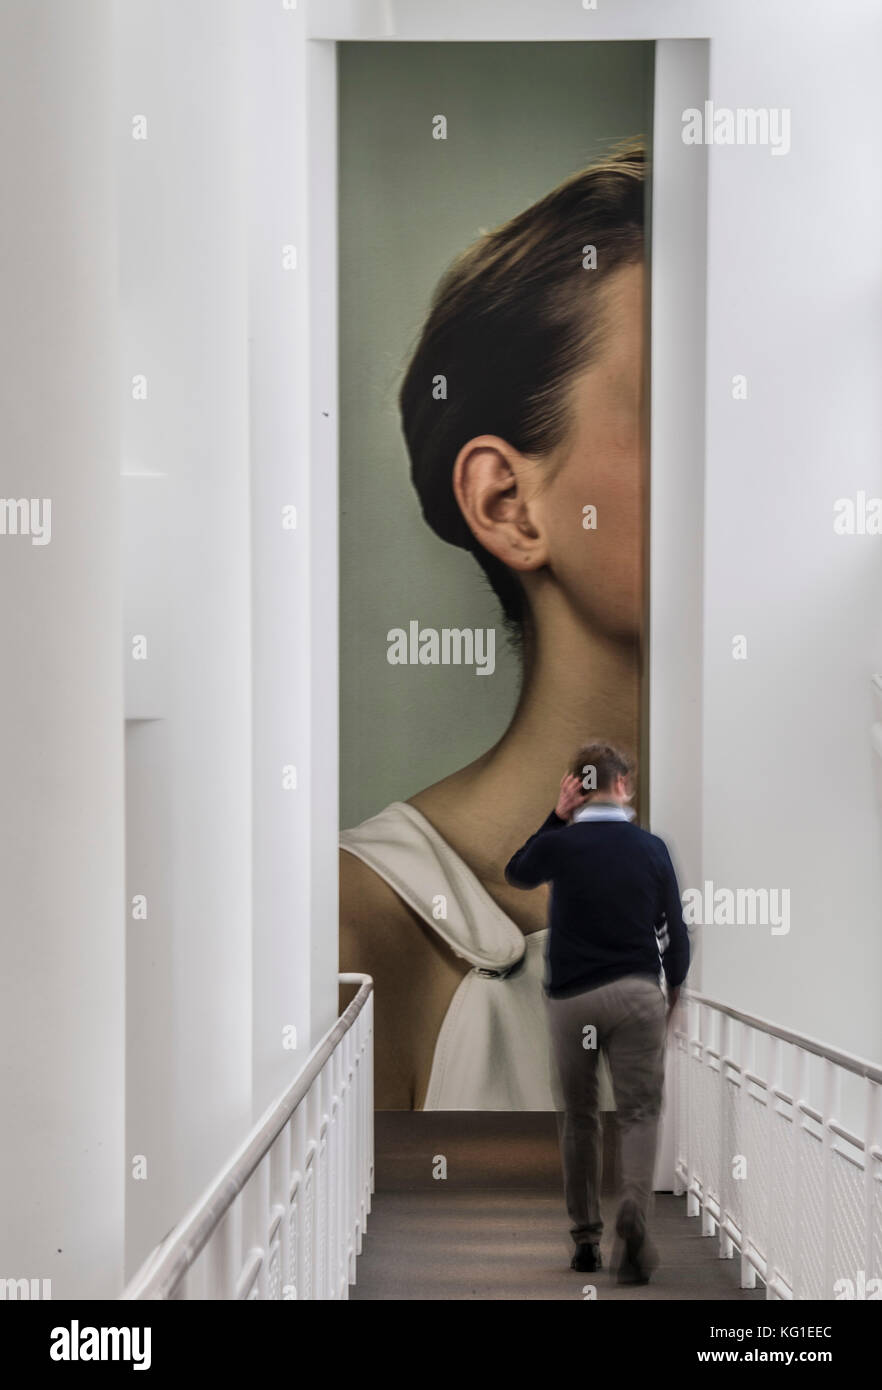 A man leaving the exhibition "Jil Sander" in the Museum für Angewandte  Kunst ('Museum of Applied Art') in Frankfurt am Main, Germany, 02 November  2017. Designs by Jil Sander are the focus